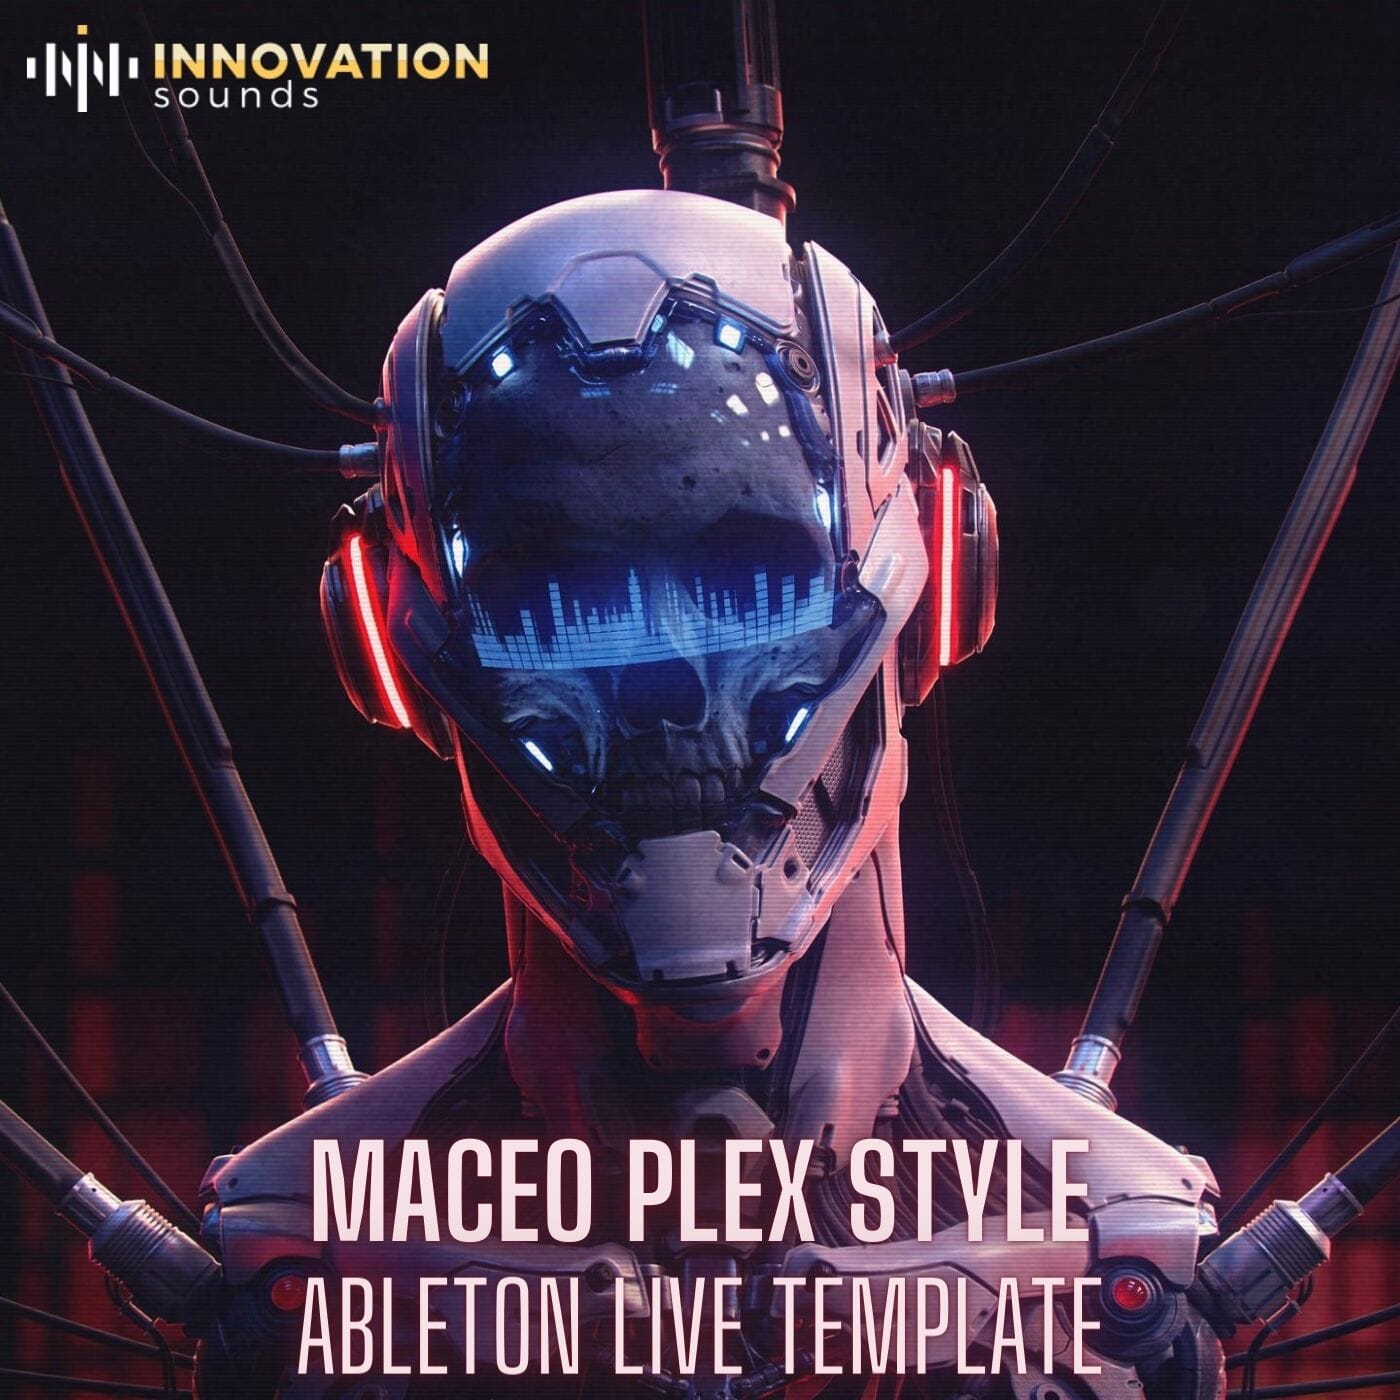 Maceo Plex Style Ableton 11 Melodic Techno Template Sample Pack Innovation Sounds